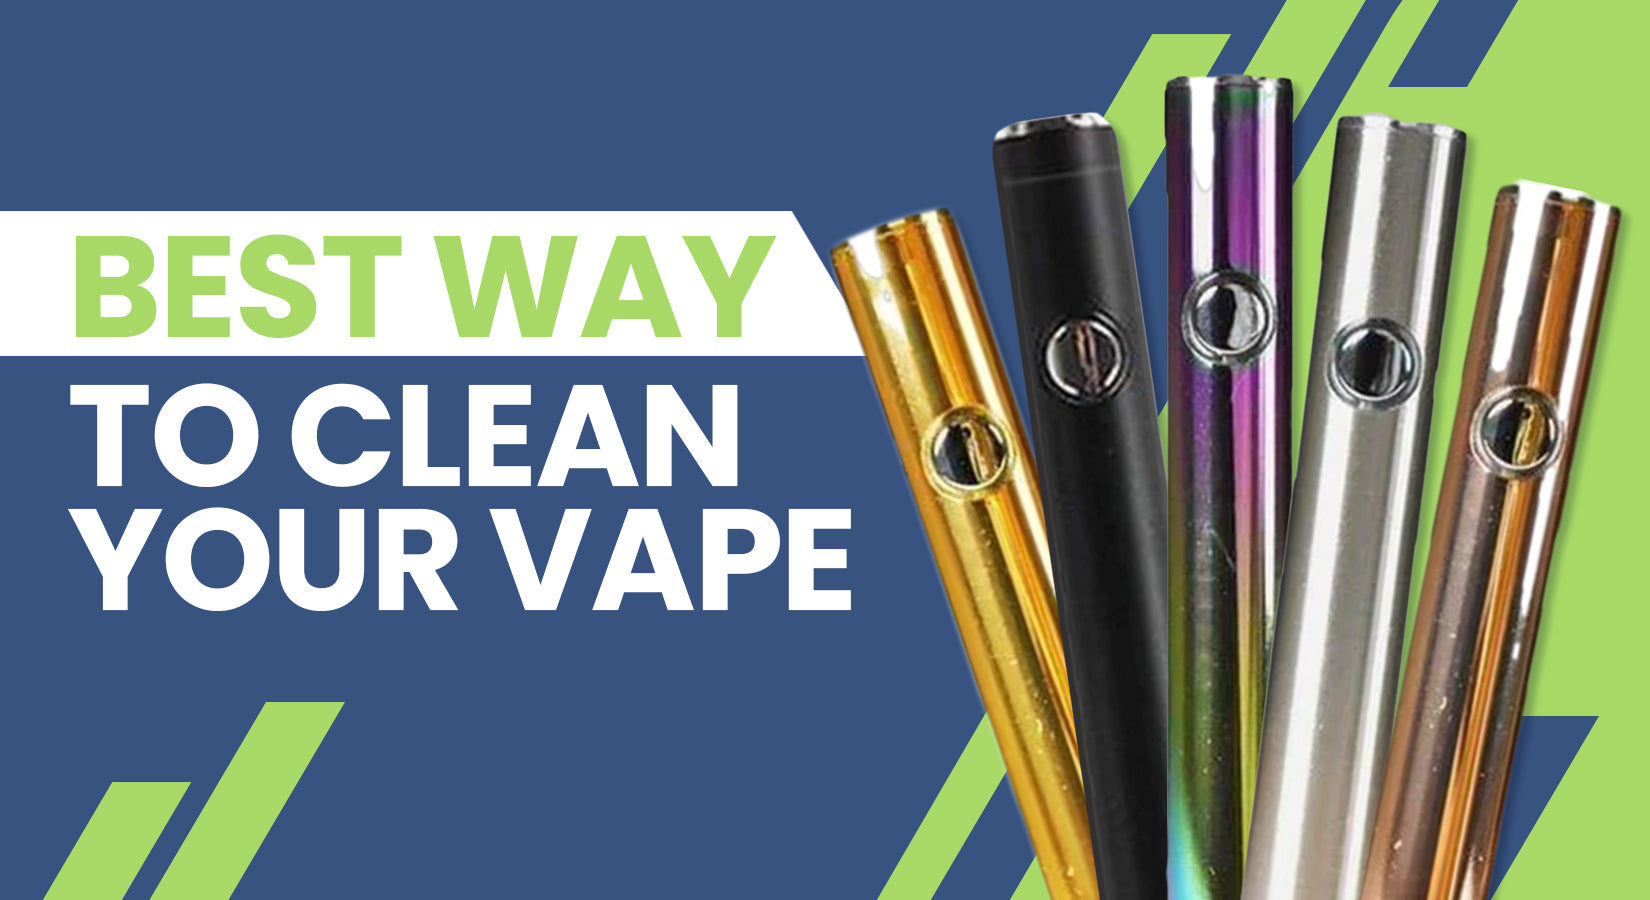 The Best Way to Clean Your Vape